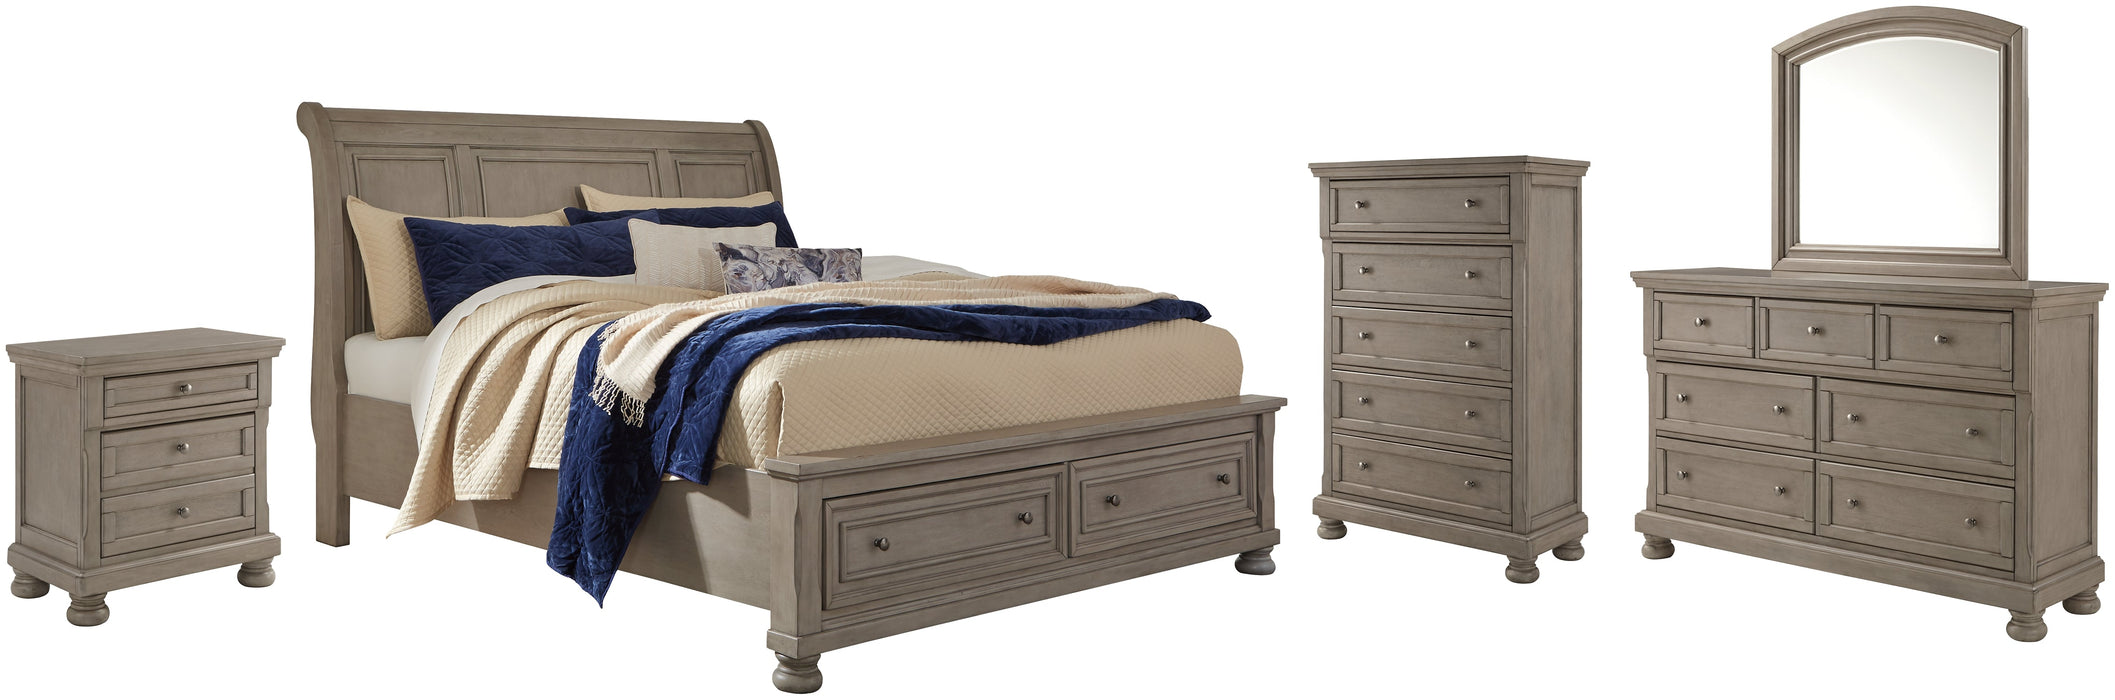 Lettner King Sleigh Bed with 2 Storage Drawers with Mirrored Dresser, Chest and Nightstand JR Furniture Storefurniture, home furniture, home decor